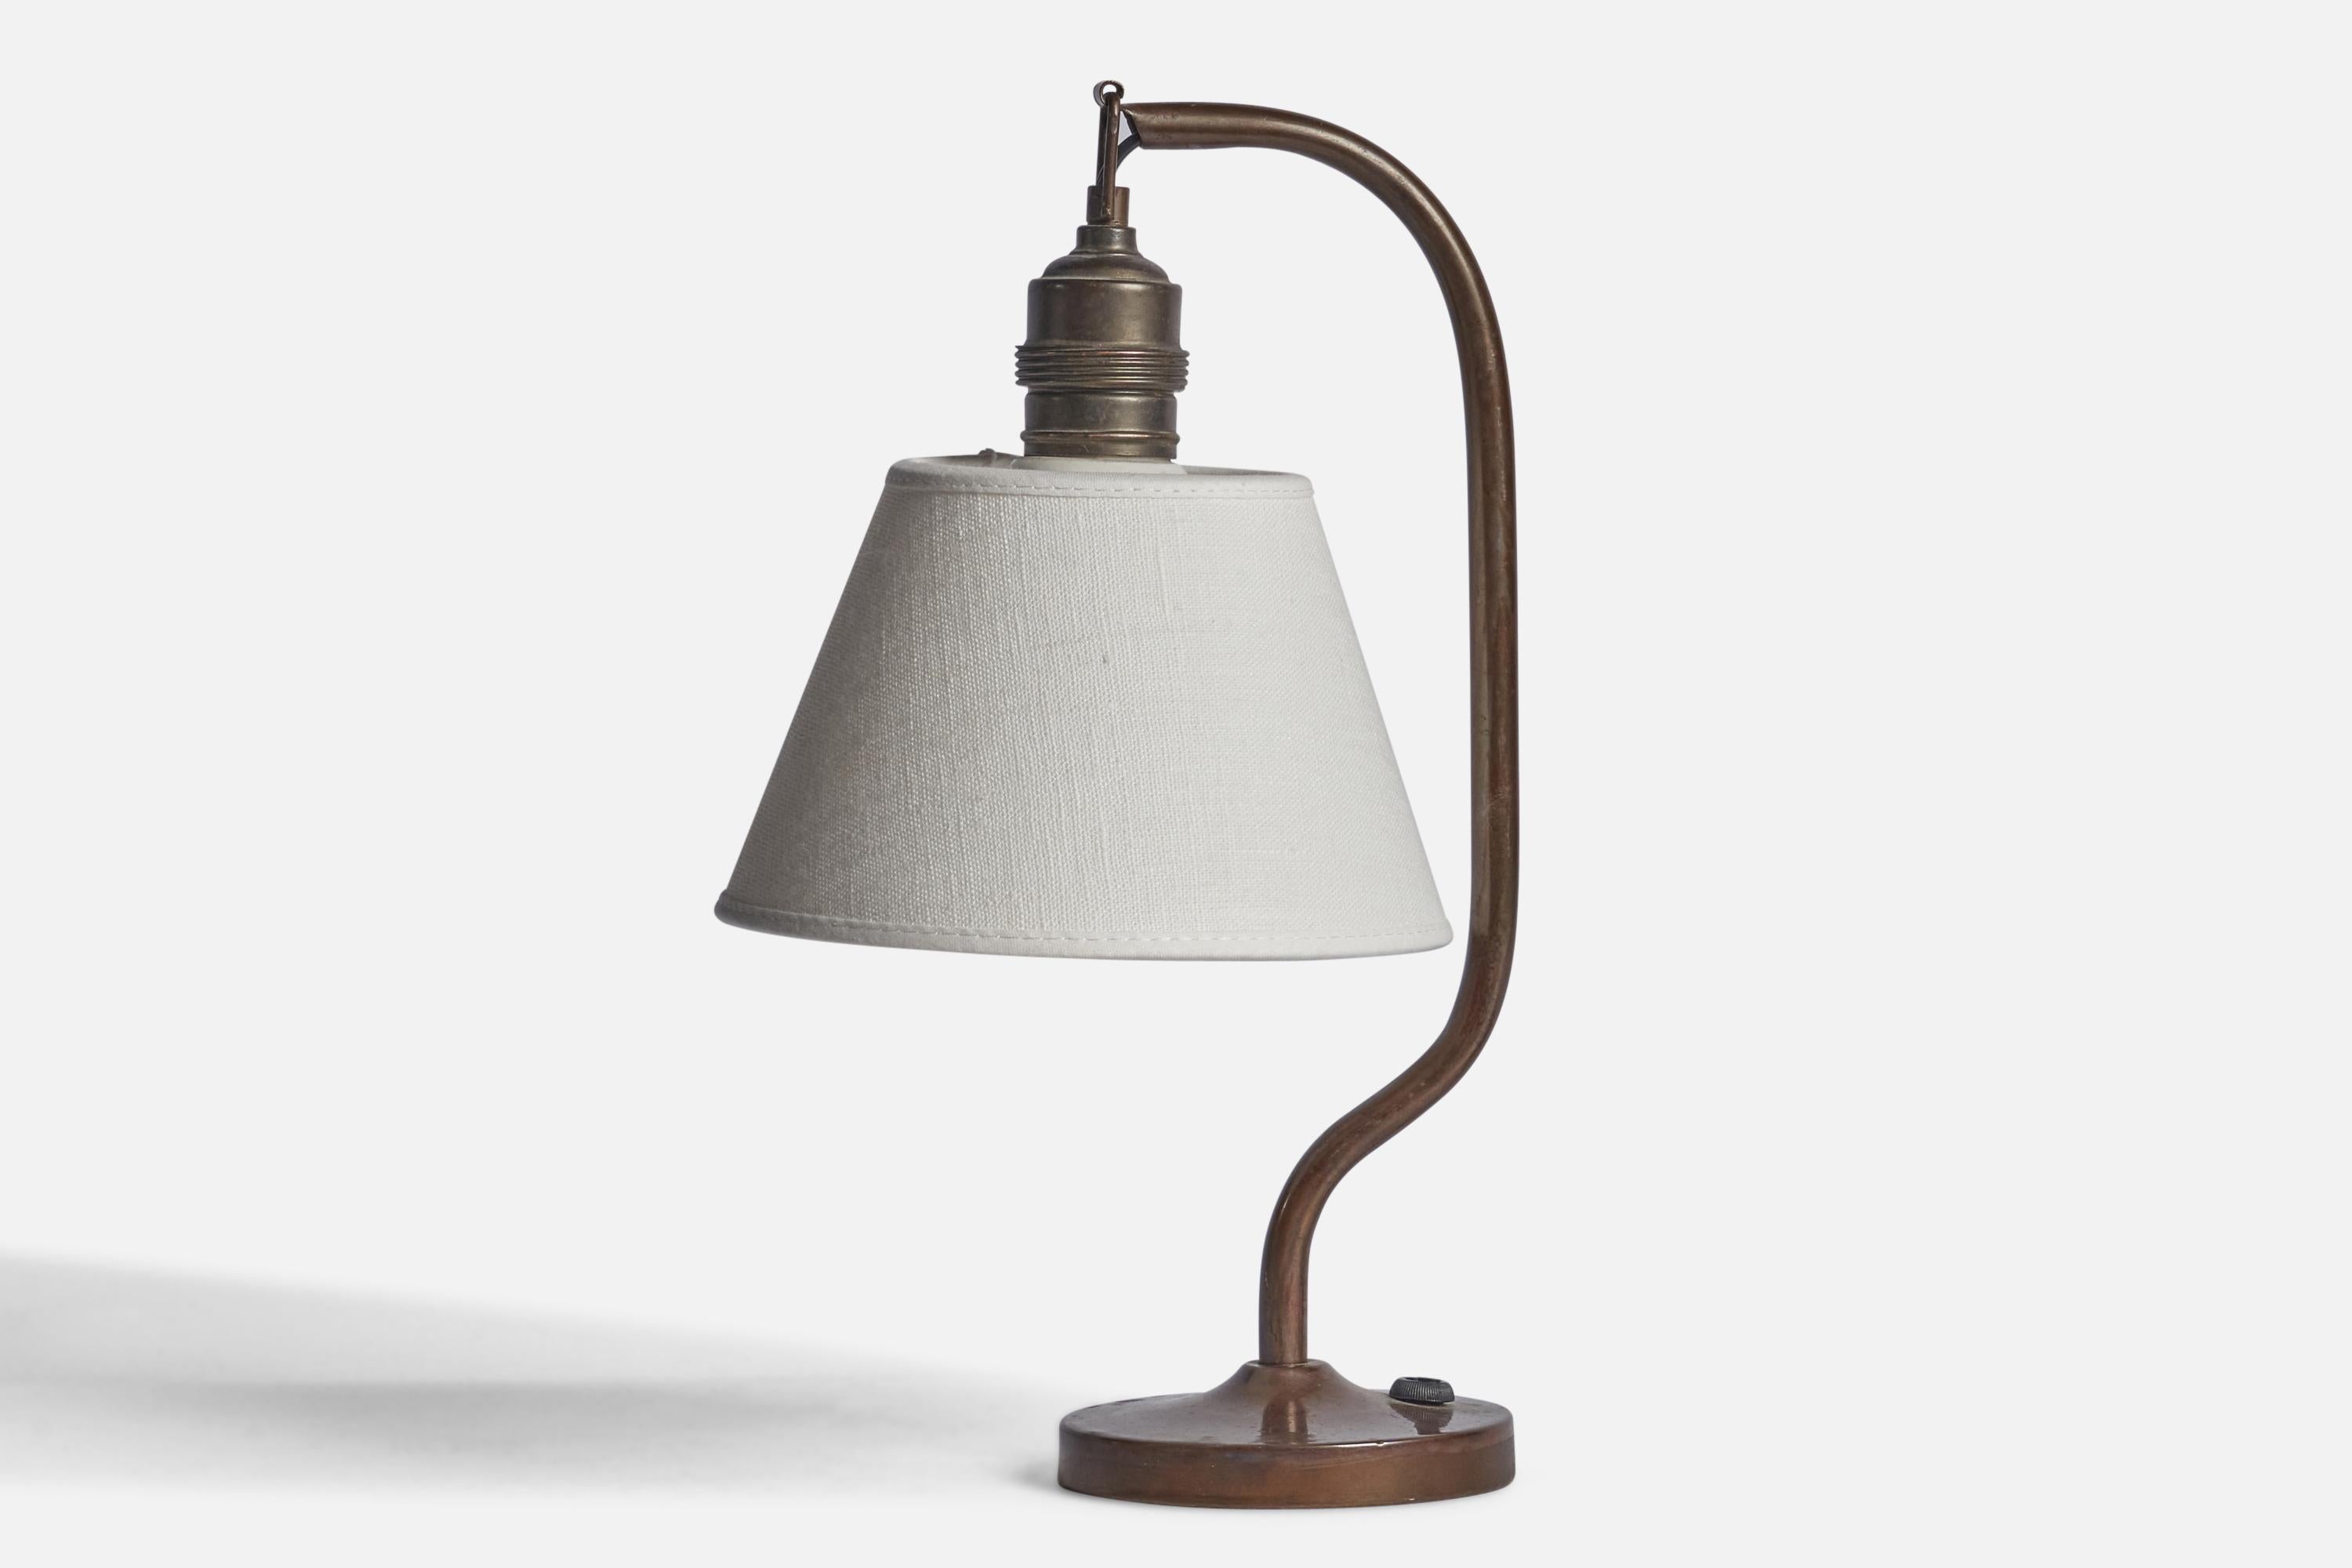 A brass and white fabric table lamp designed and produced in Sweden, c. 1930s.

Overall Dimensions (inches): 12.5” H x 6.25” W x 7.25” D
Bulb Specifications: E-26 Bulb
Number of Sockets: 1
All lighting will be converted for US usage. We are unable